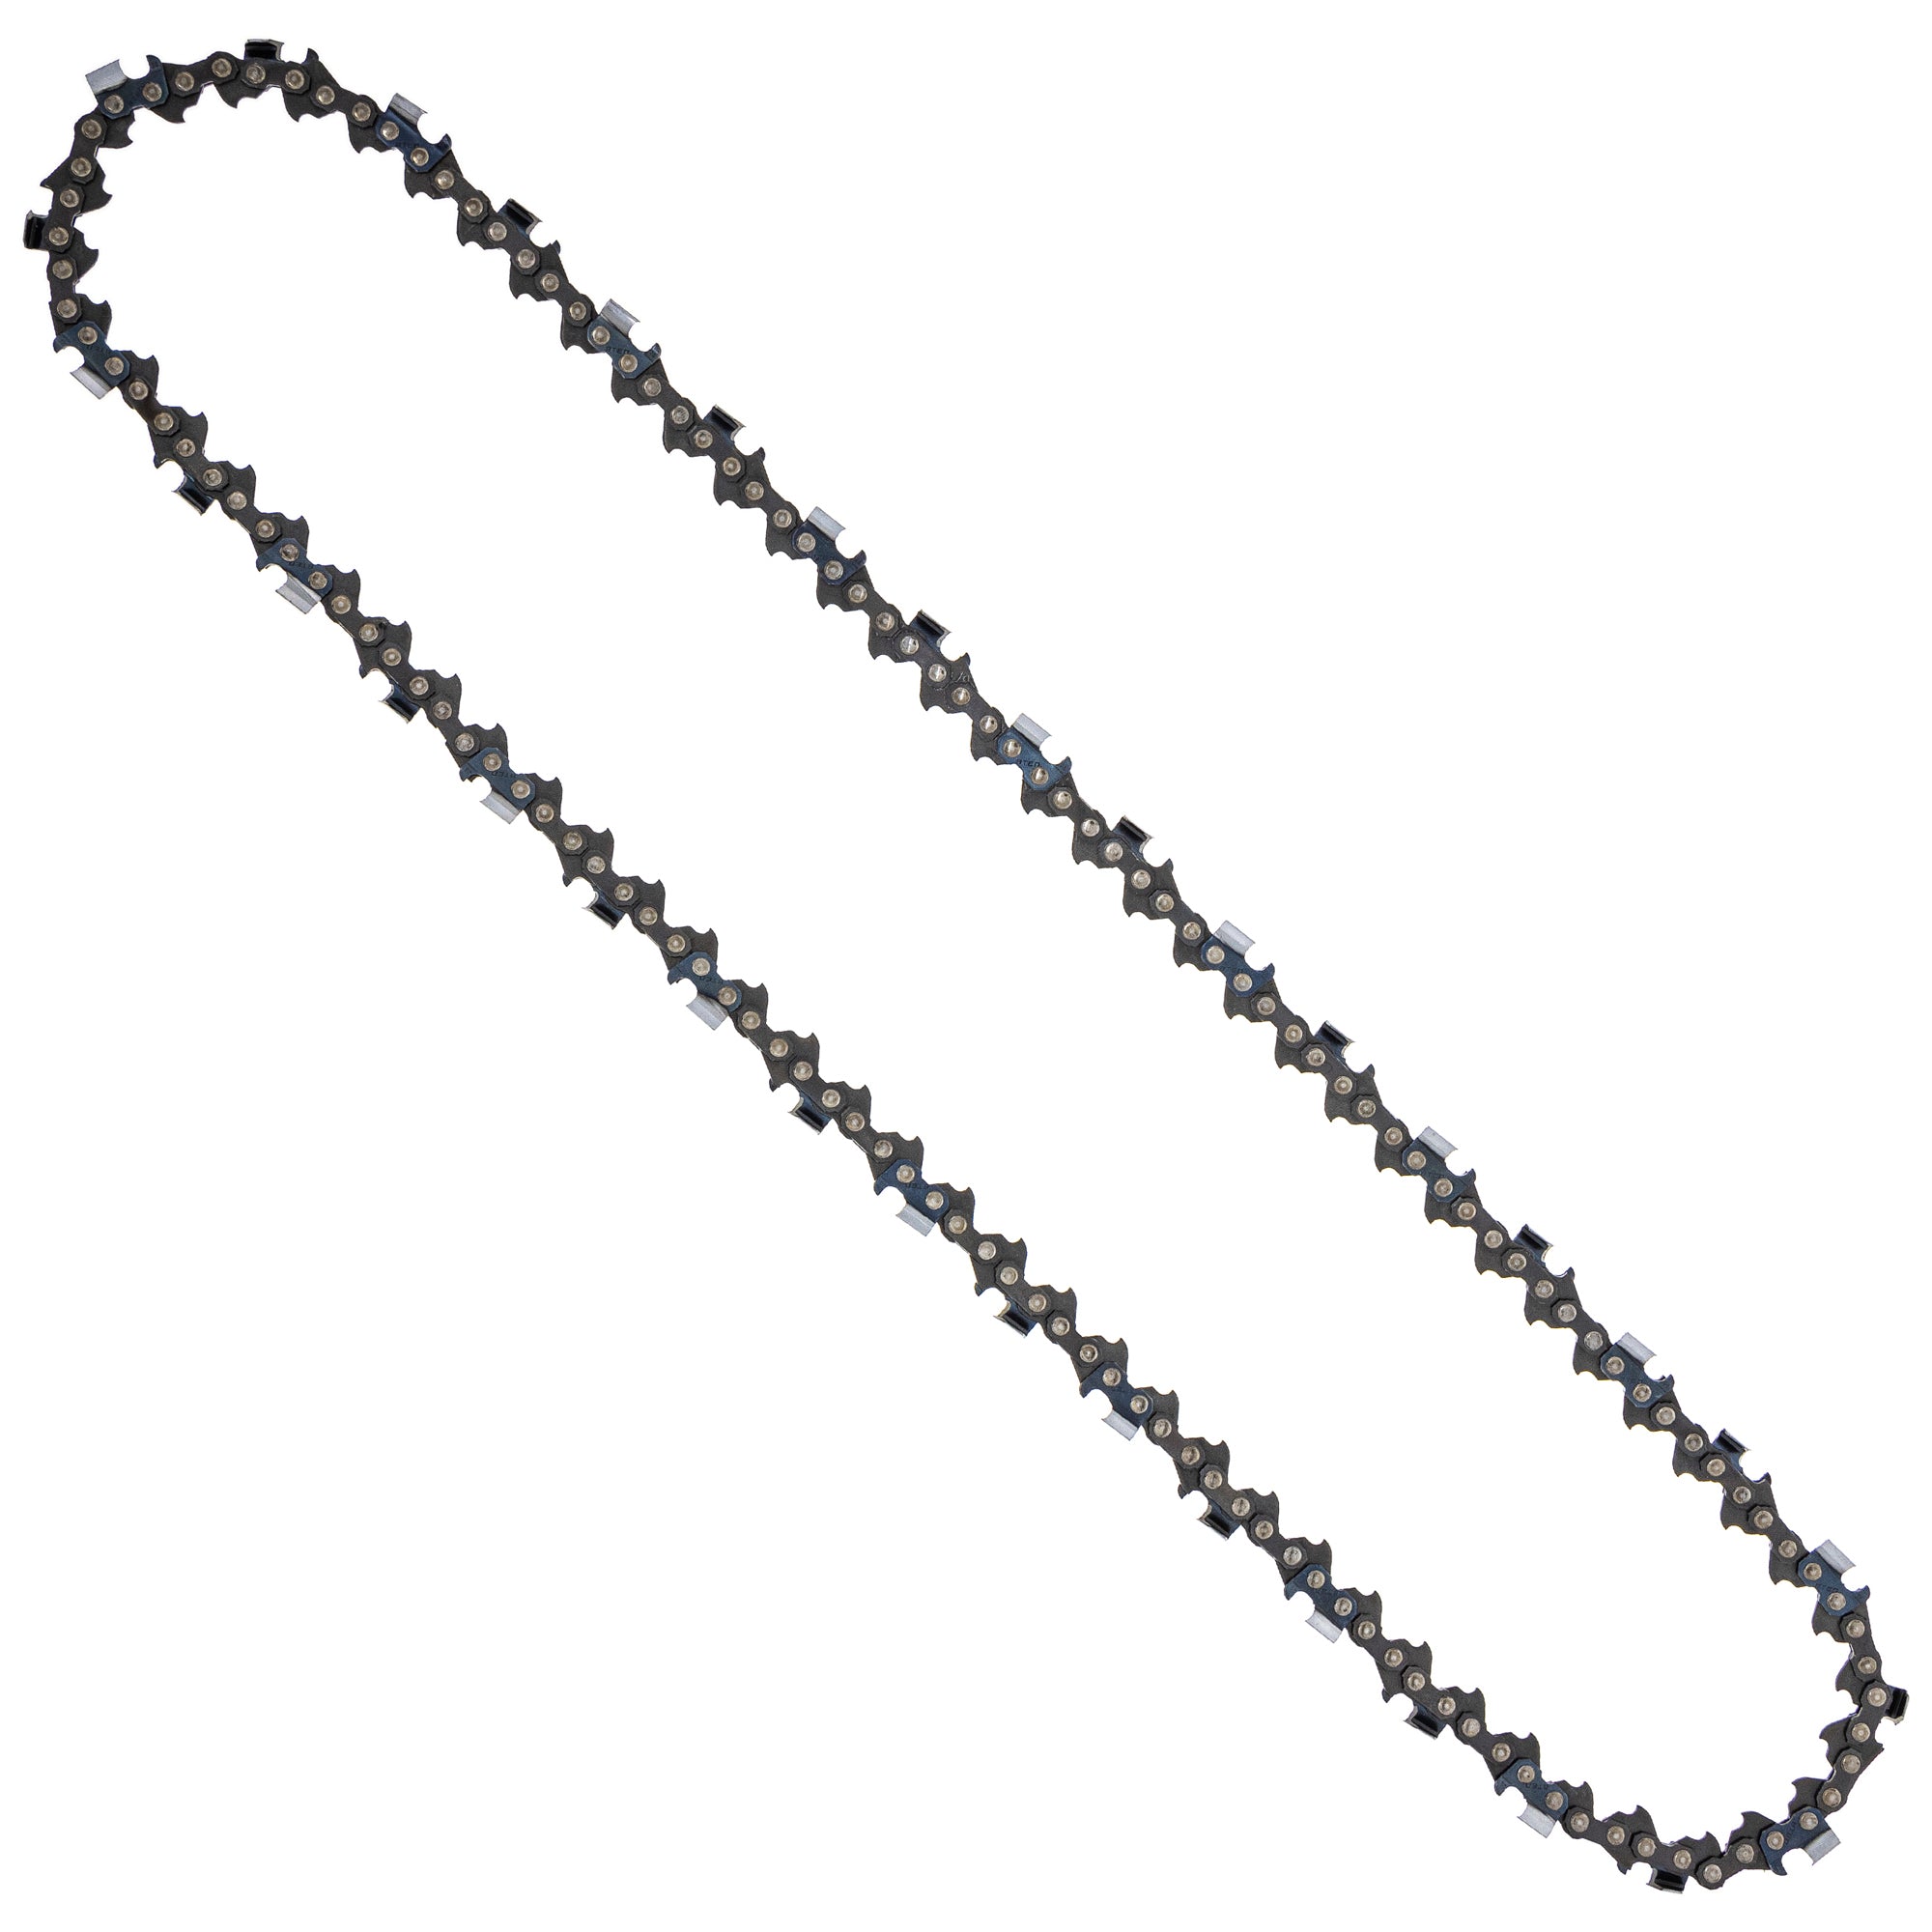 8TEN 810-CCC2263H Chain 2-Pack for zOTHER Oregon Husqvarna Poulan